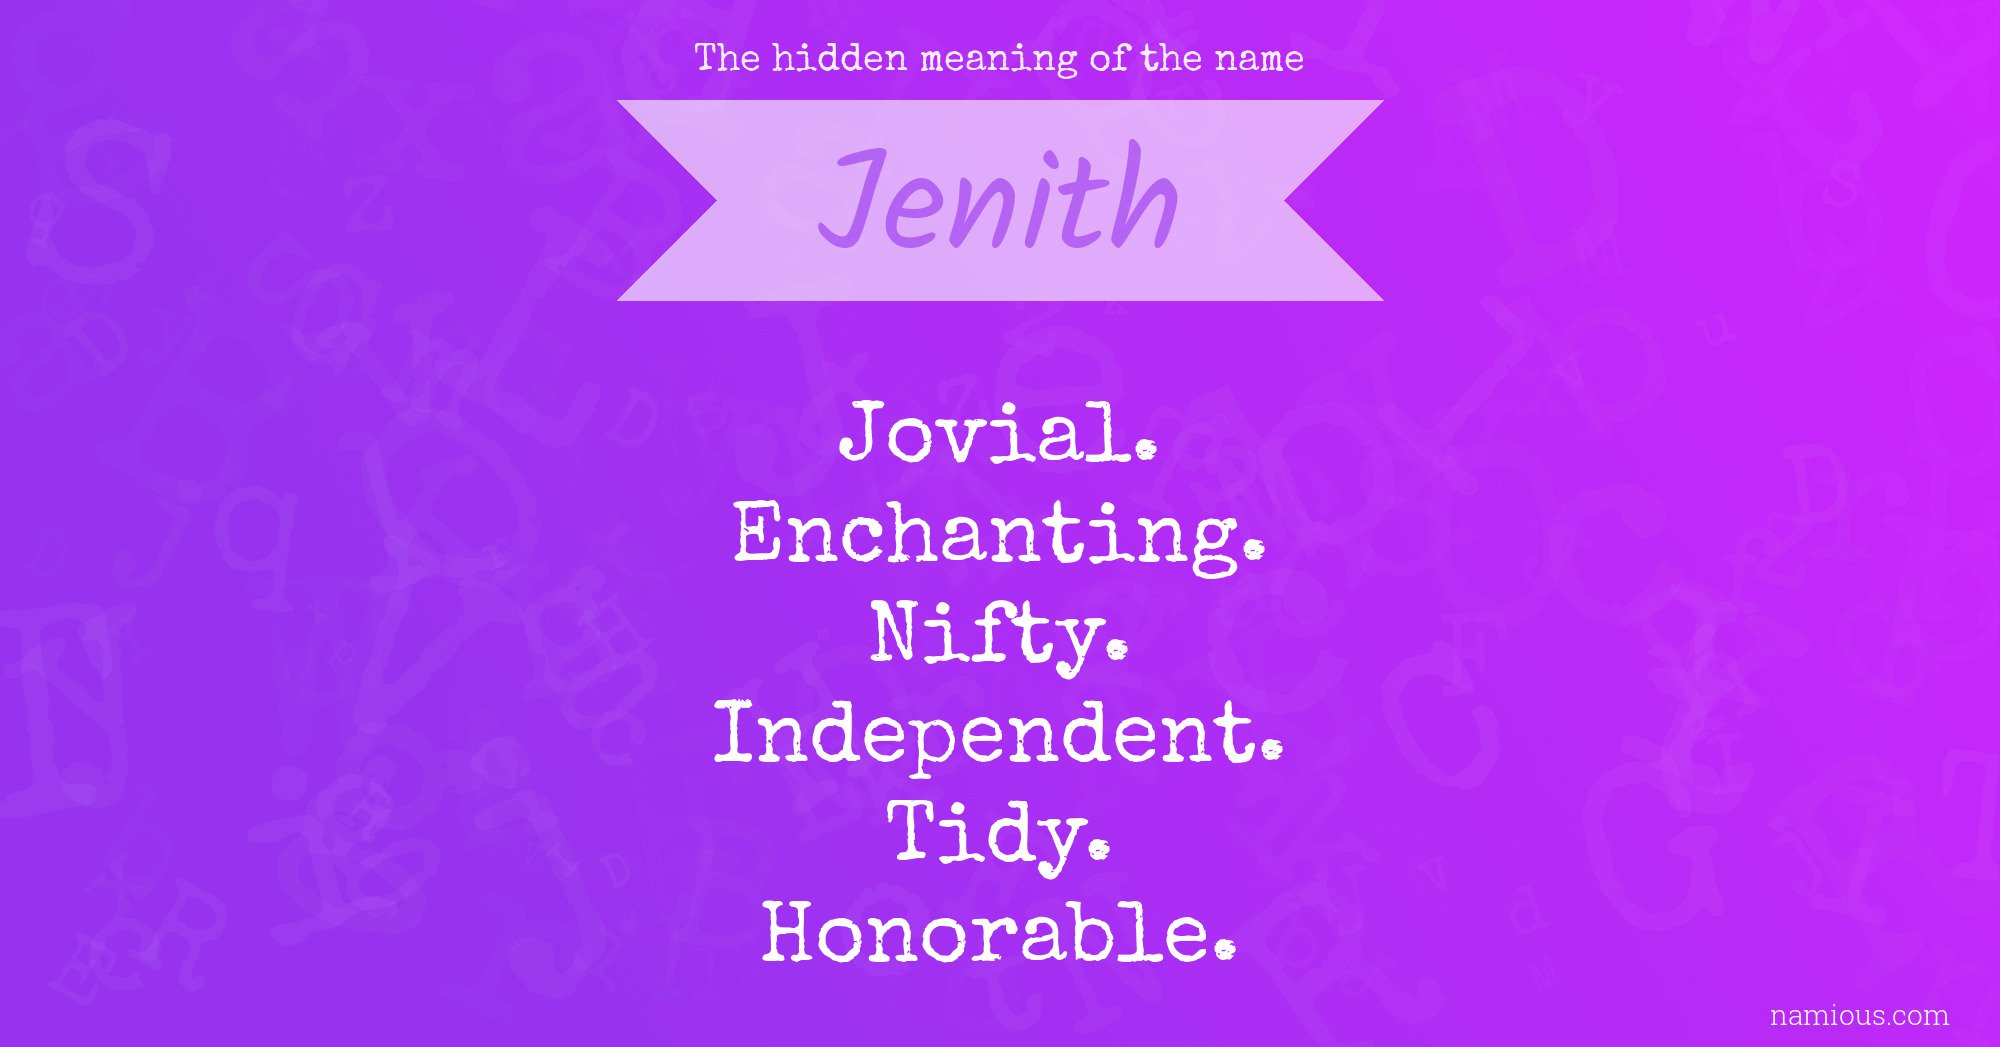 The hidden meaning of the name Jenith